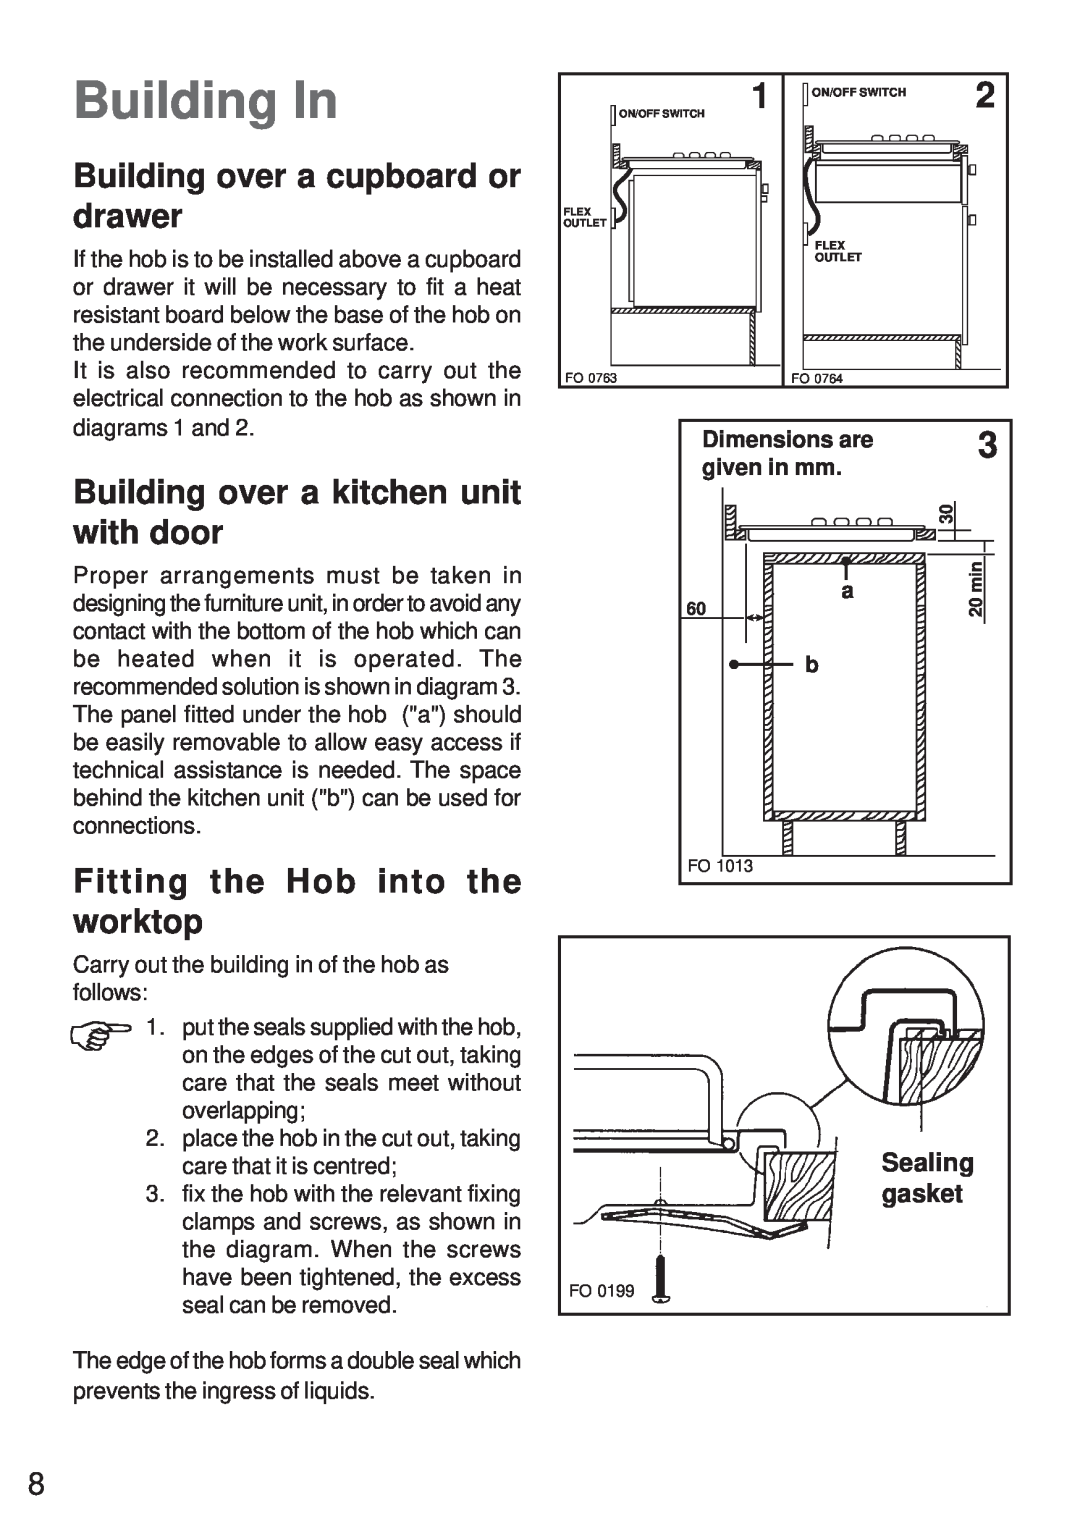 Moffat MEH 631 Building In, Building over a cupboard or drawer, Building over a kitchen unit with door, Sealing gasket 